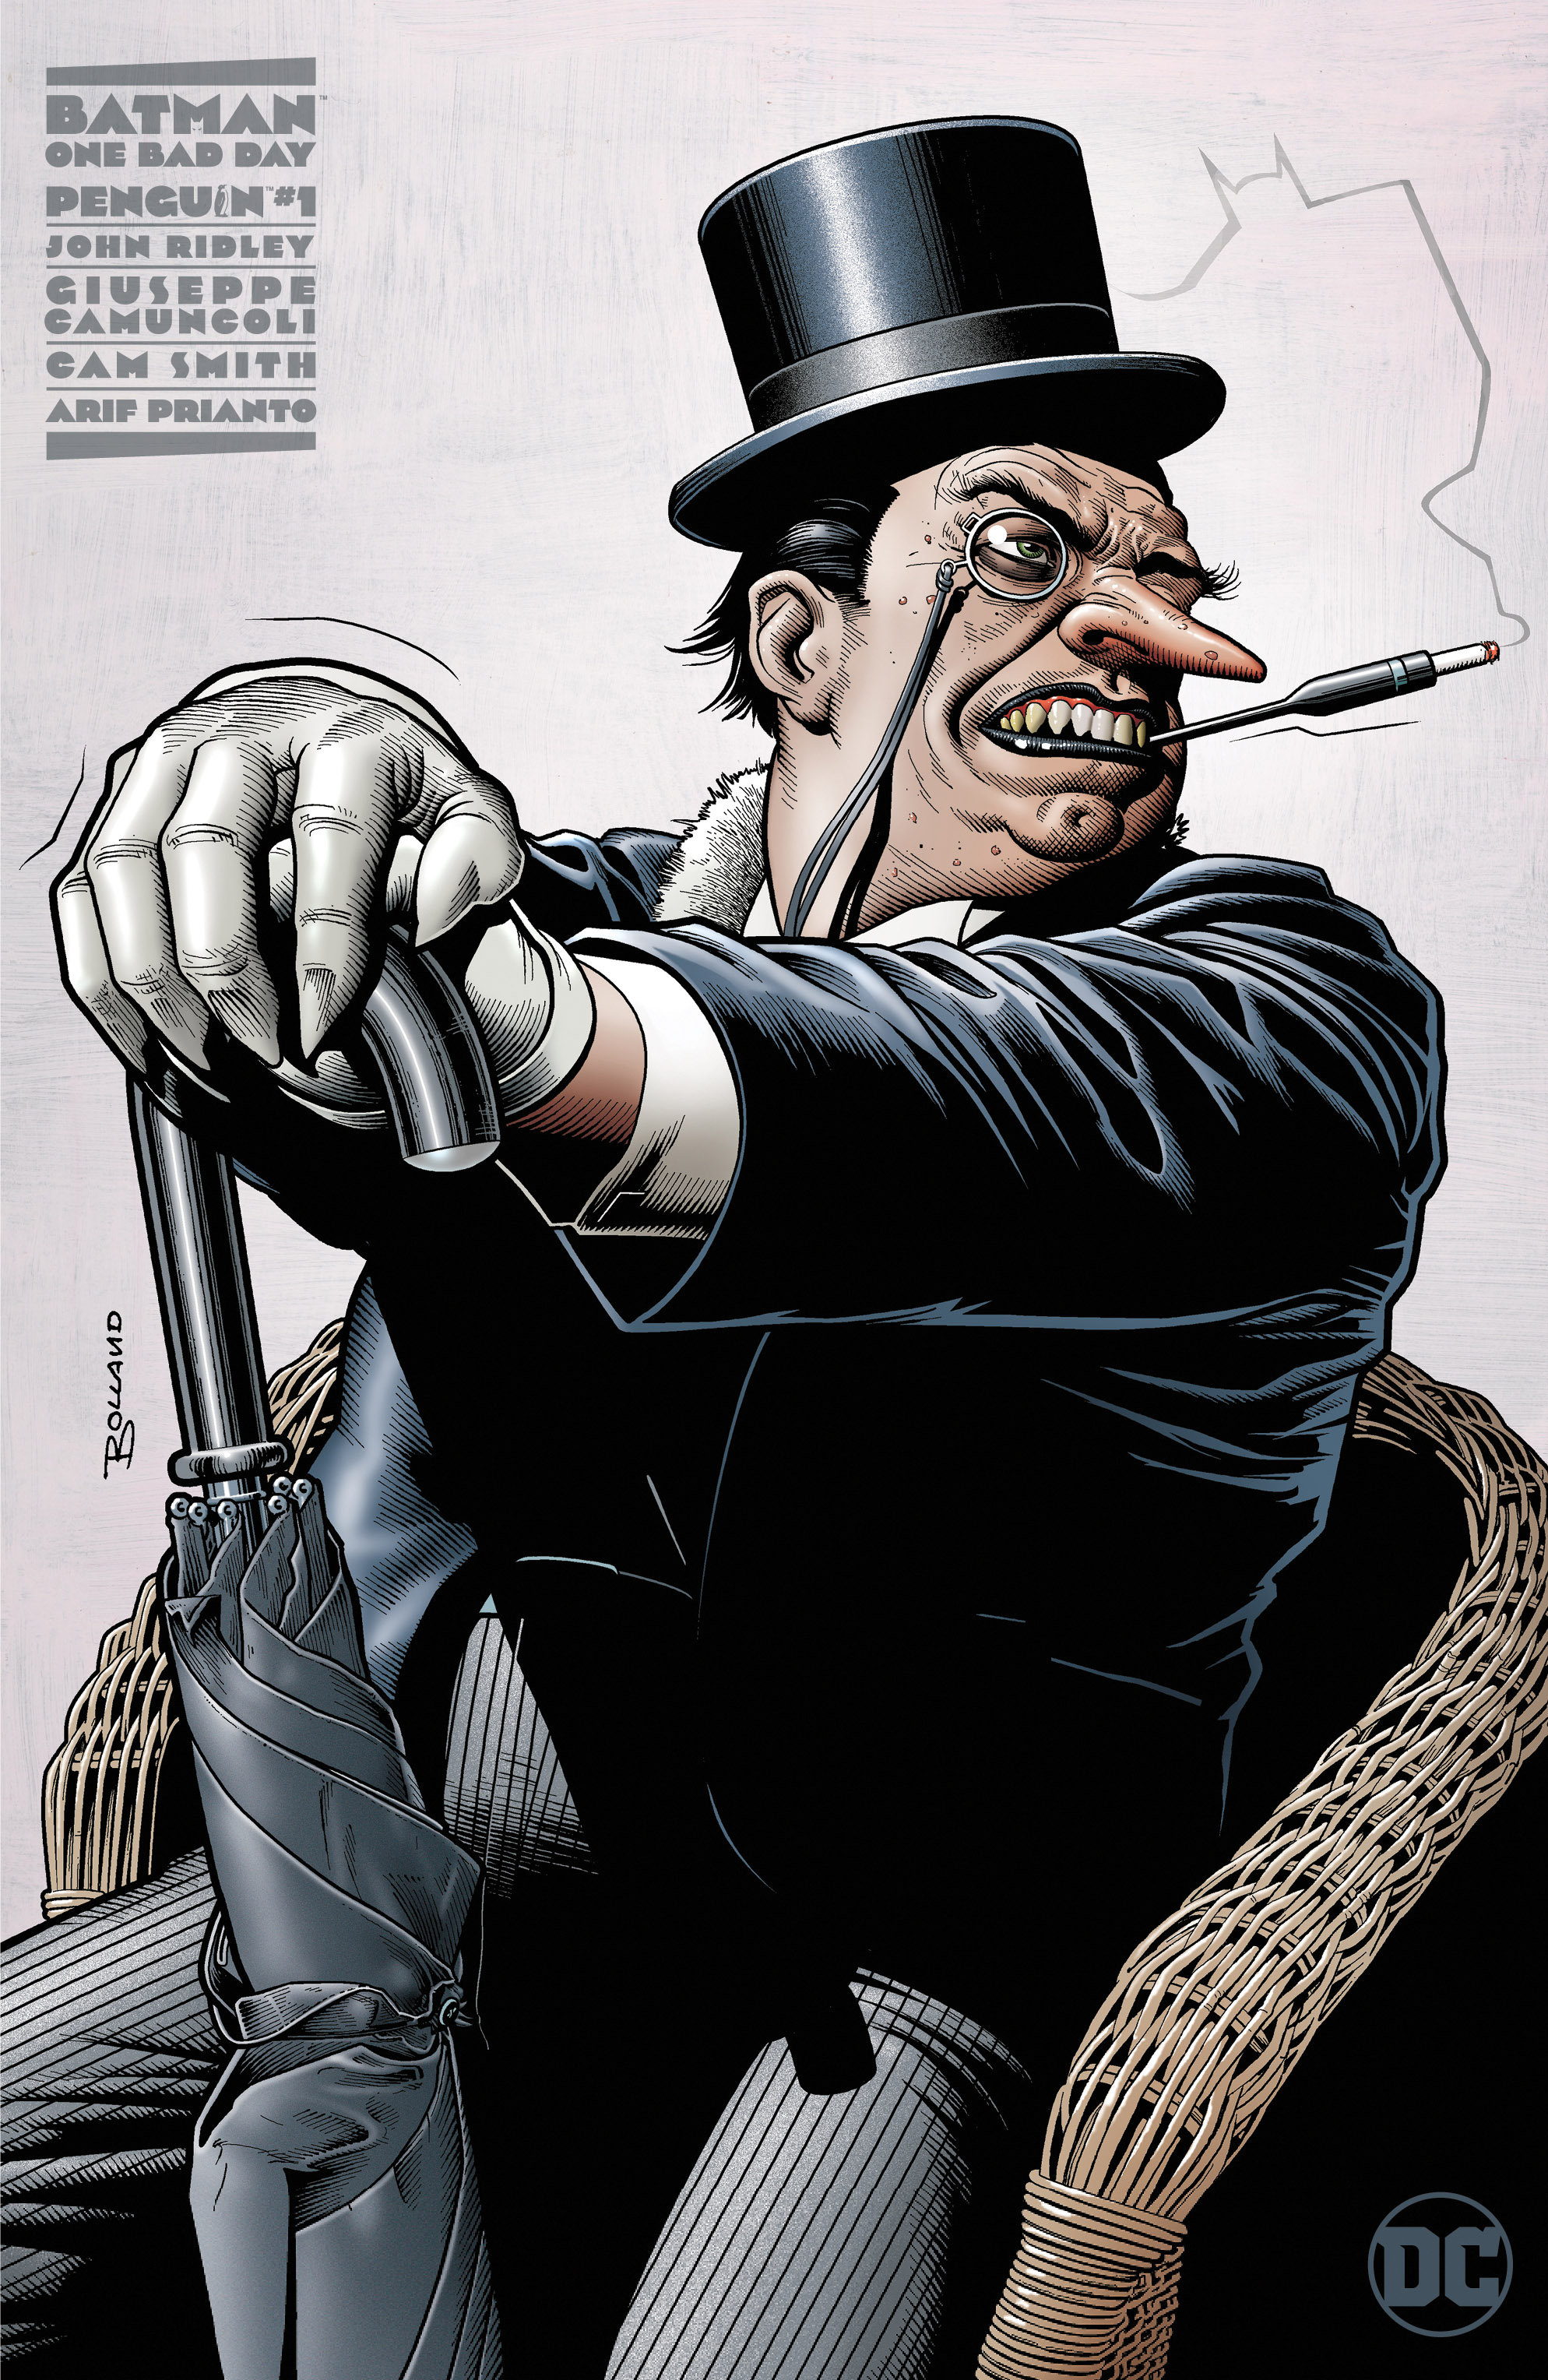 Batman One Bad Day Penguin #1 (One Shot) Cover E 1 for 100 Incentive Brian  Bolland Variant